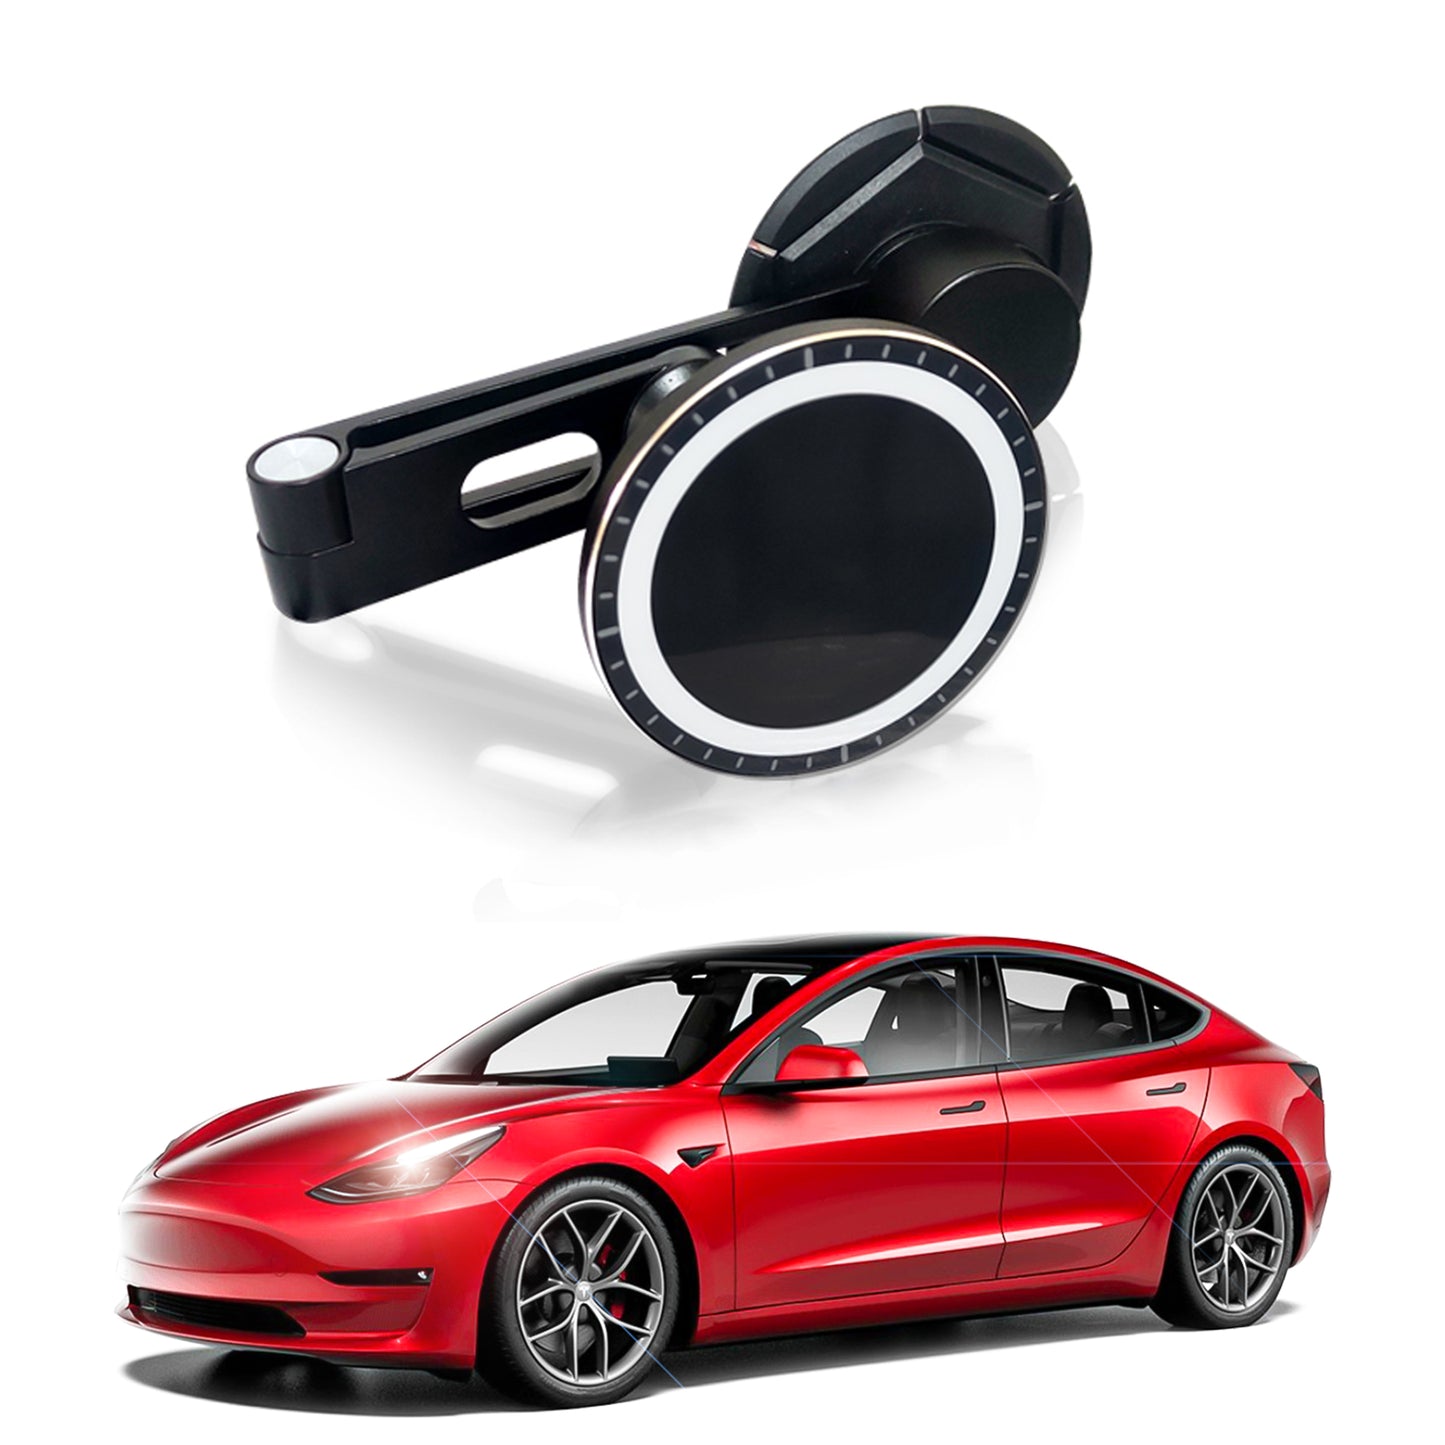 phone holder mount magsafe mag safe mag-safe magnetic screen hidden invisible foldaway apple magnetic iphone tesla model 3 Y car 2022 2023 2021 2020 2019 2018 s3xy arcoche accessories accessory aftermarket Vehicles standard long range performance sr+ electric car rwd ev interior diy decoration price elon musk must have